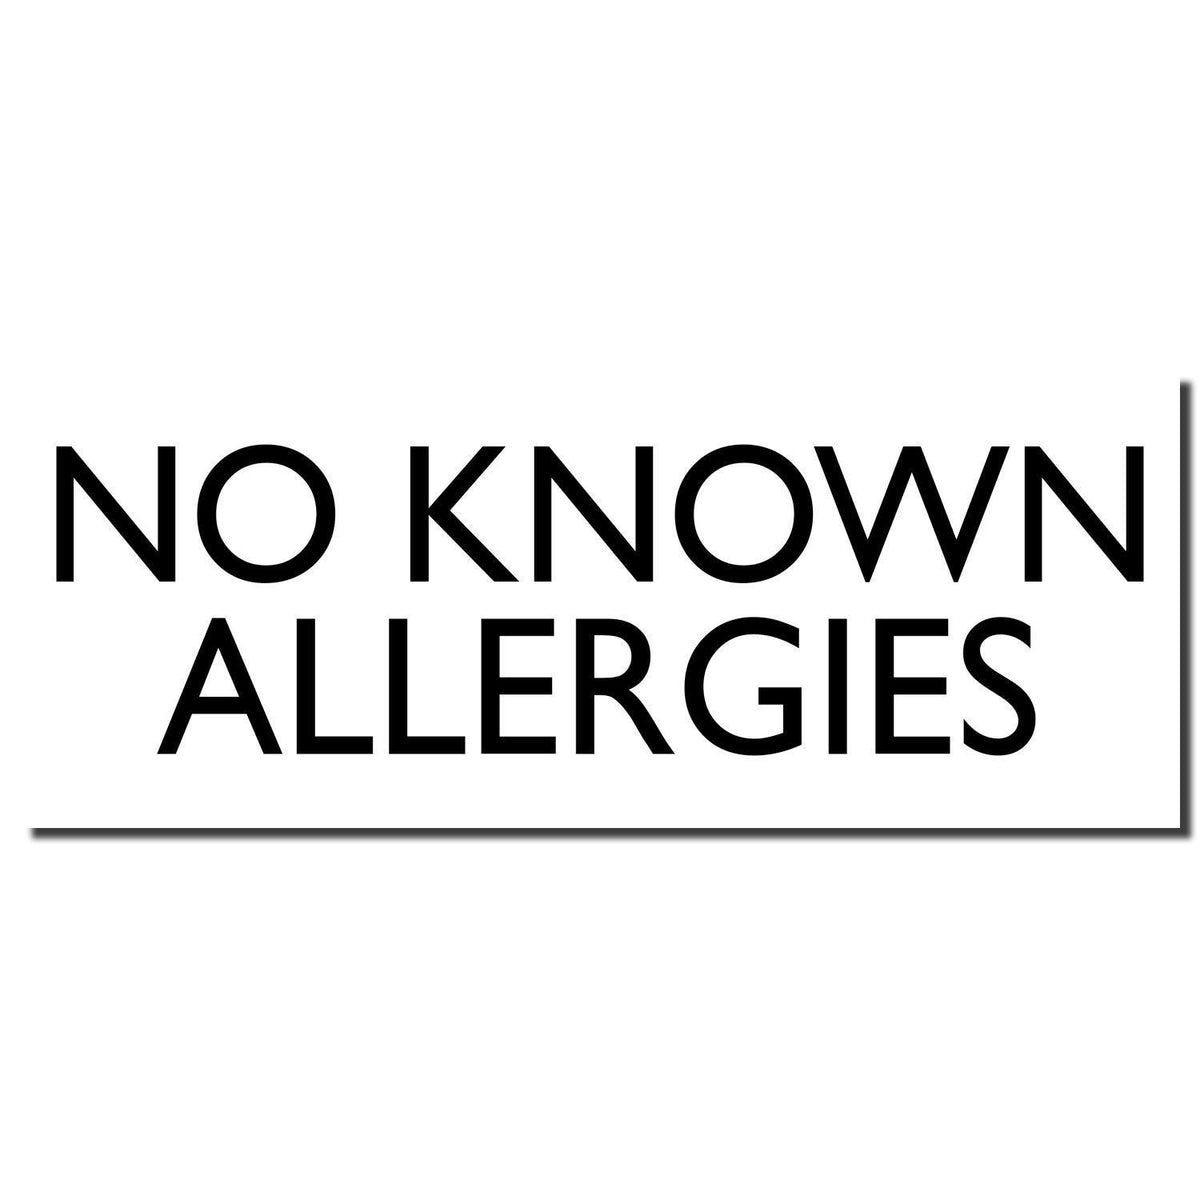 No Known Allergies Rubber Stamp - Engineer Seal Stamps - Brand_Acorn, Impression Size_Small, Stamp Type_Regular Stamp, Type of Use_Medical Office